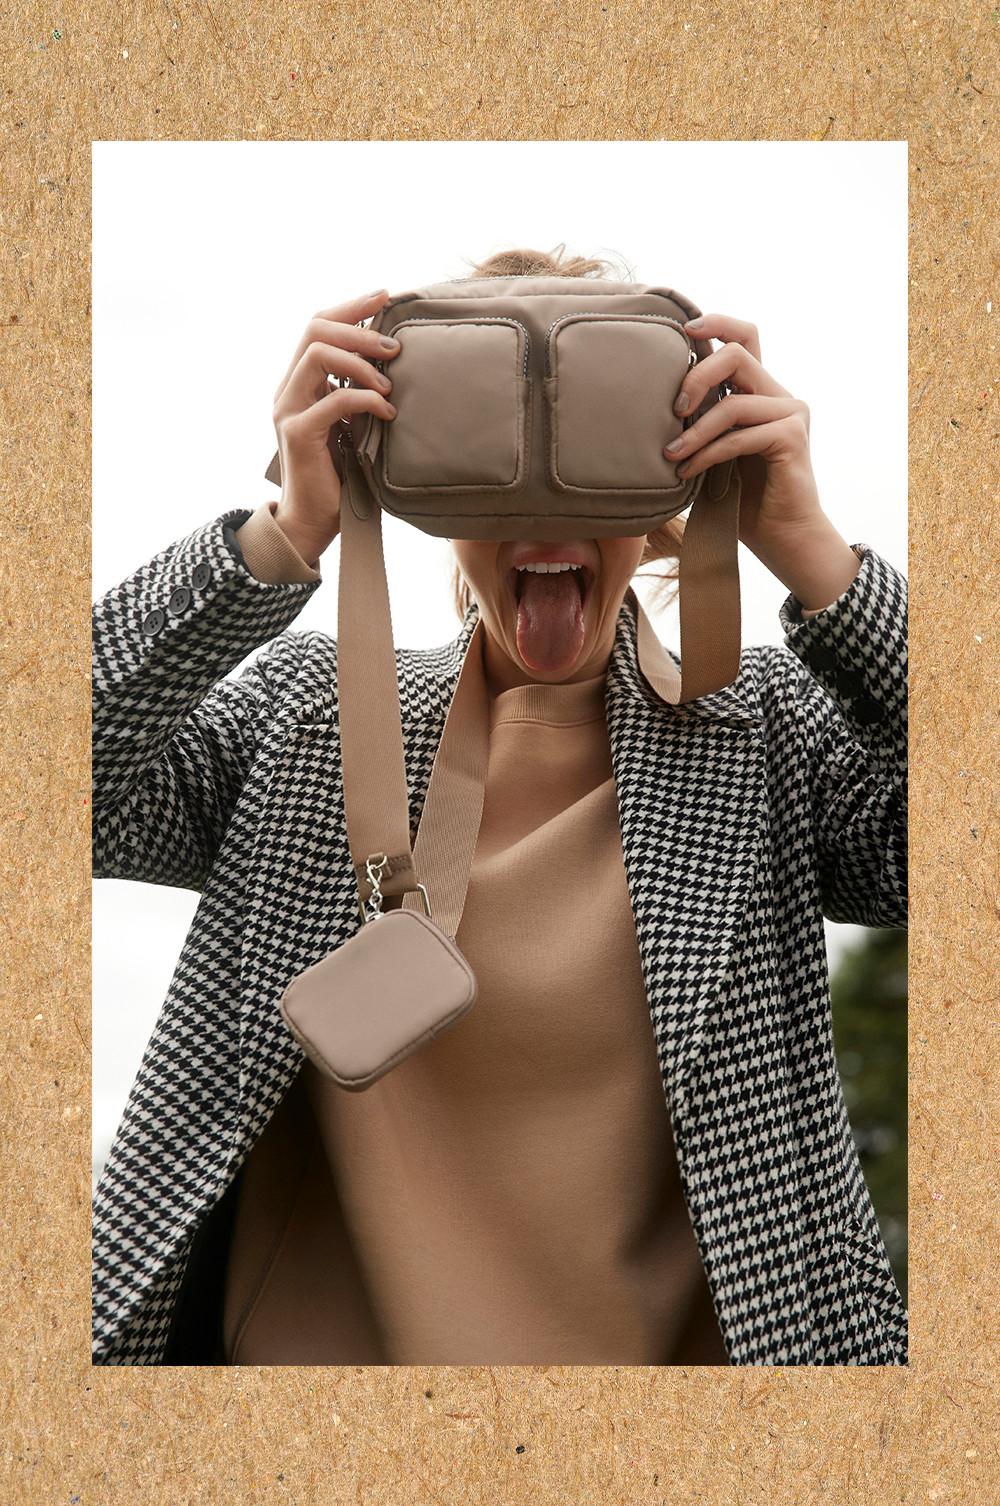 Model with bag over face